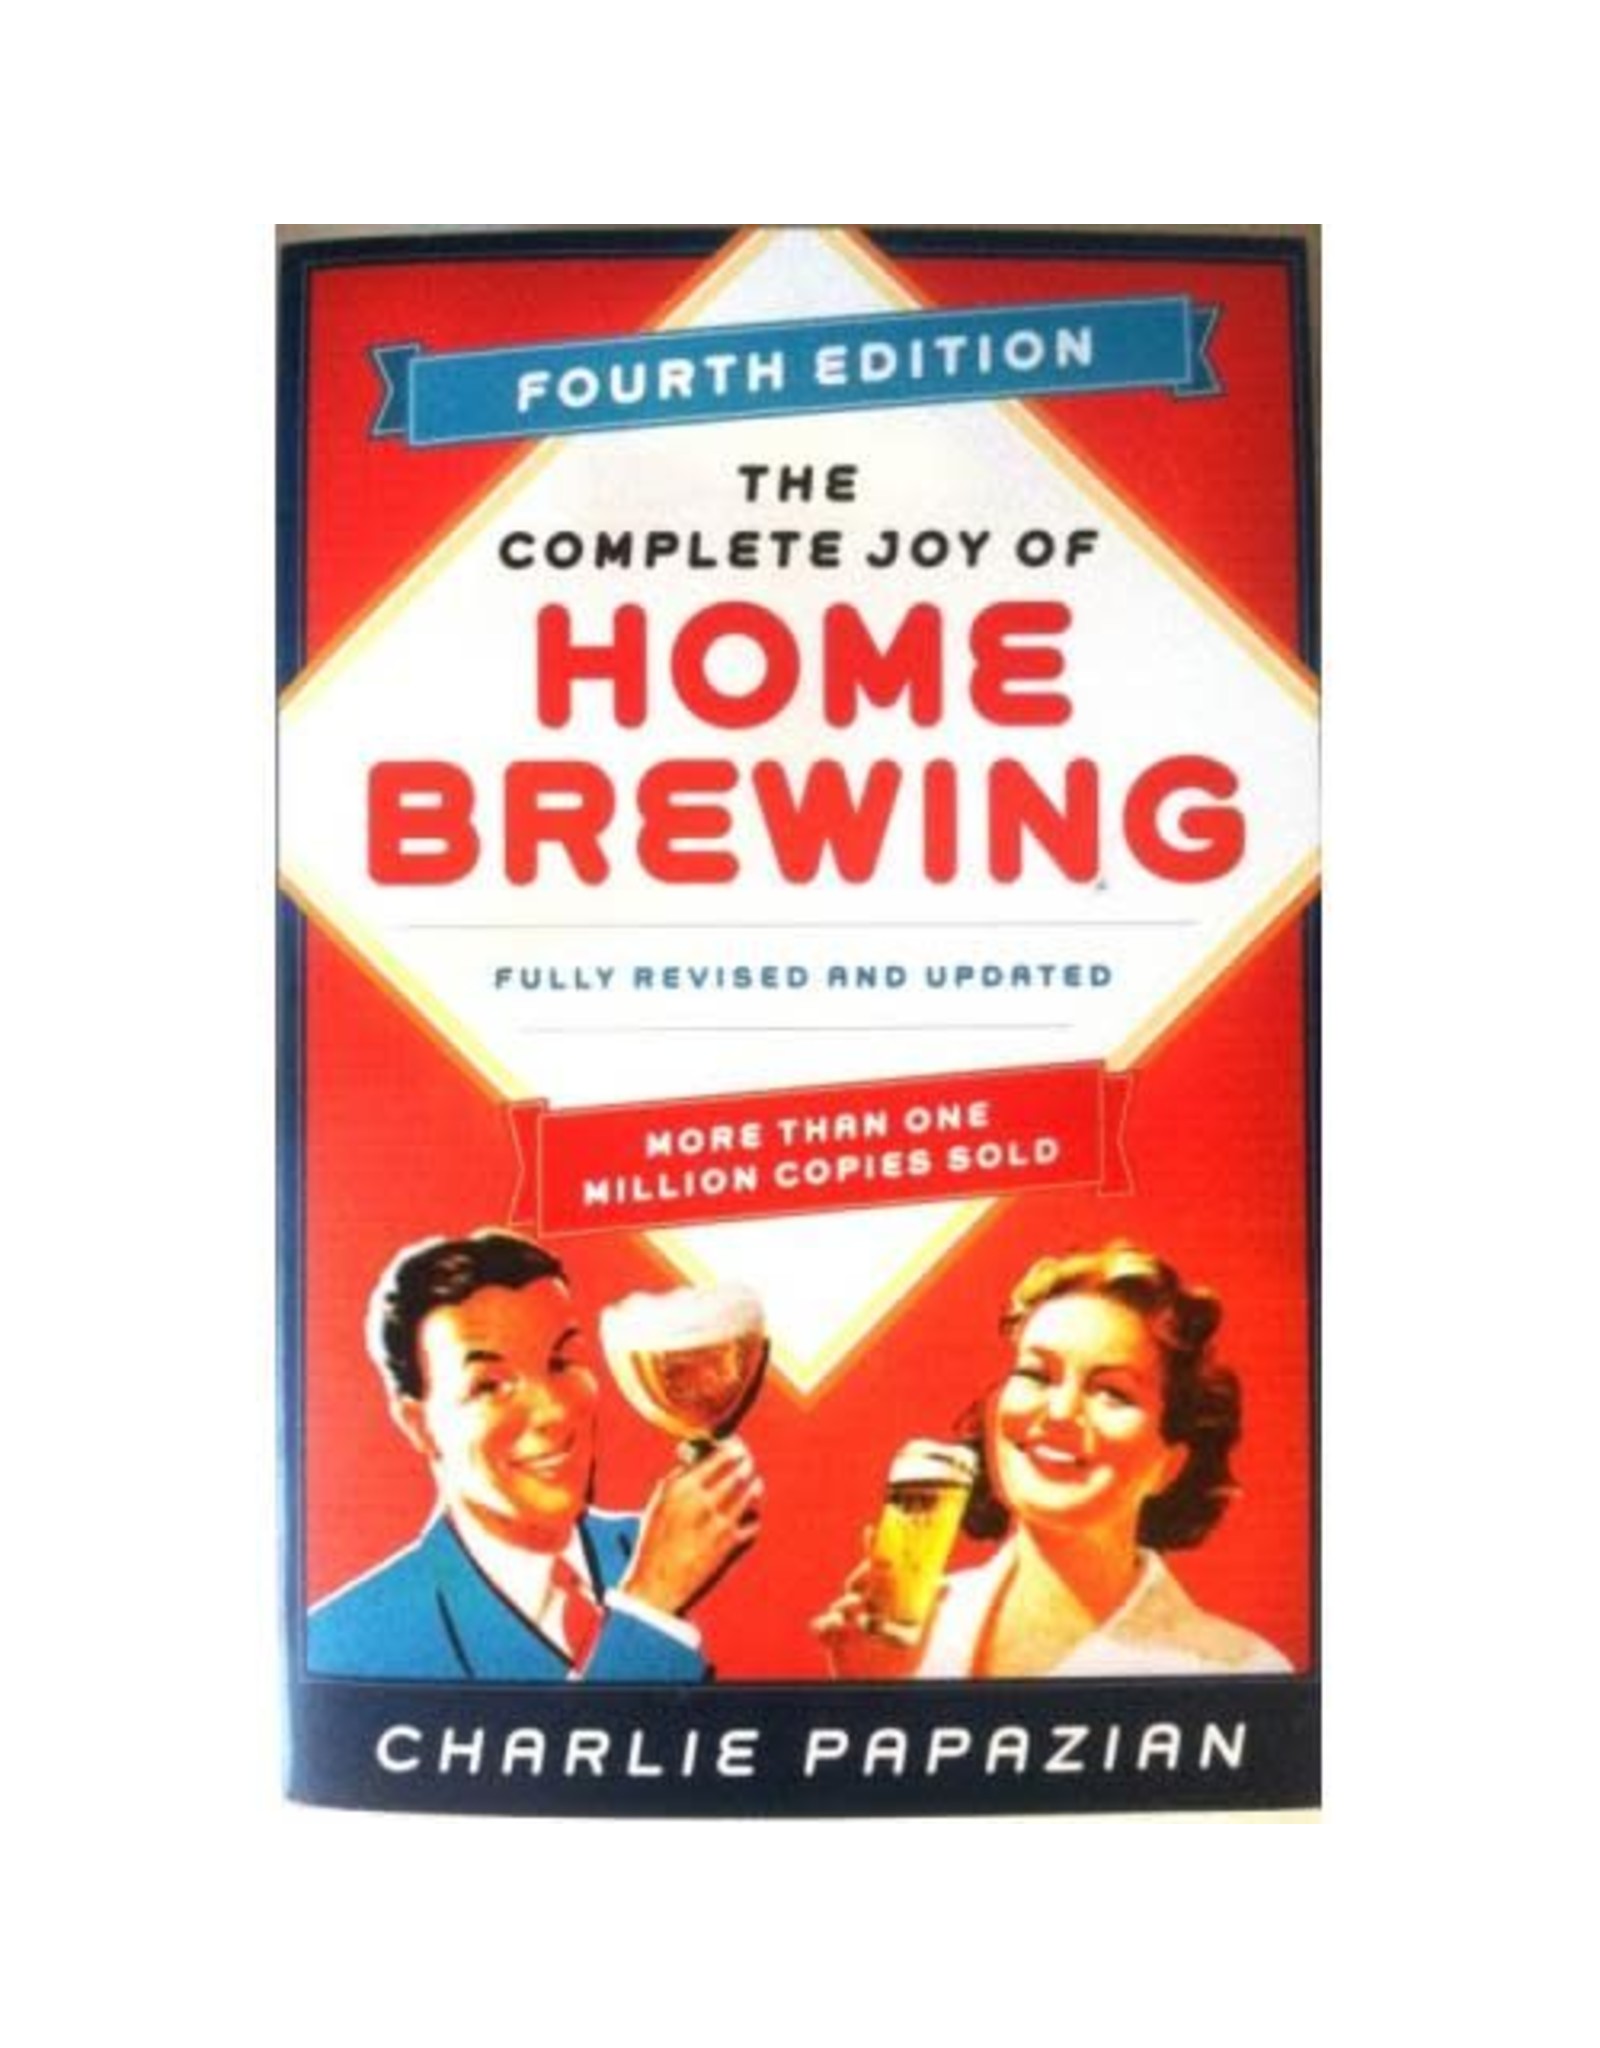 THE JOY OF HOMEBREWING 4TH EDITION